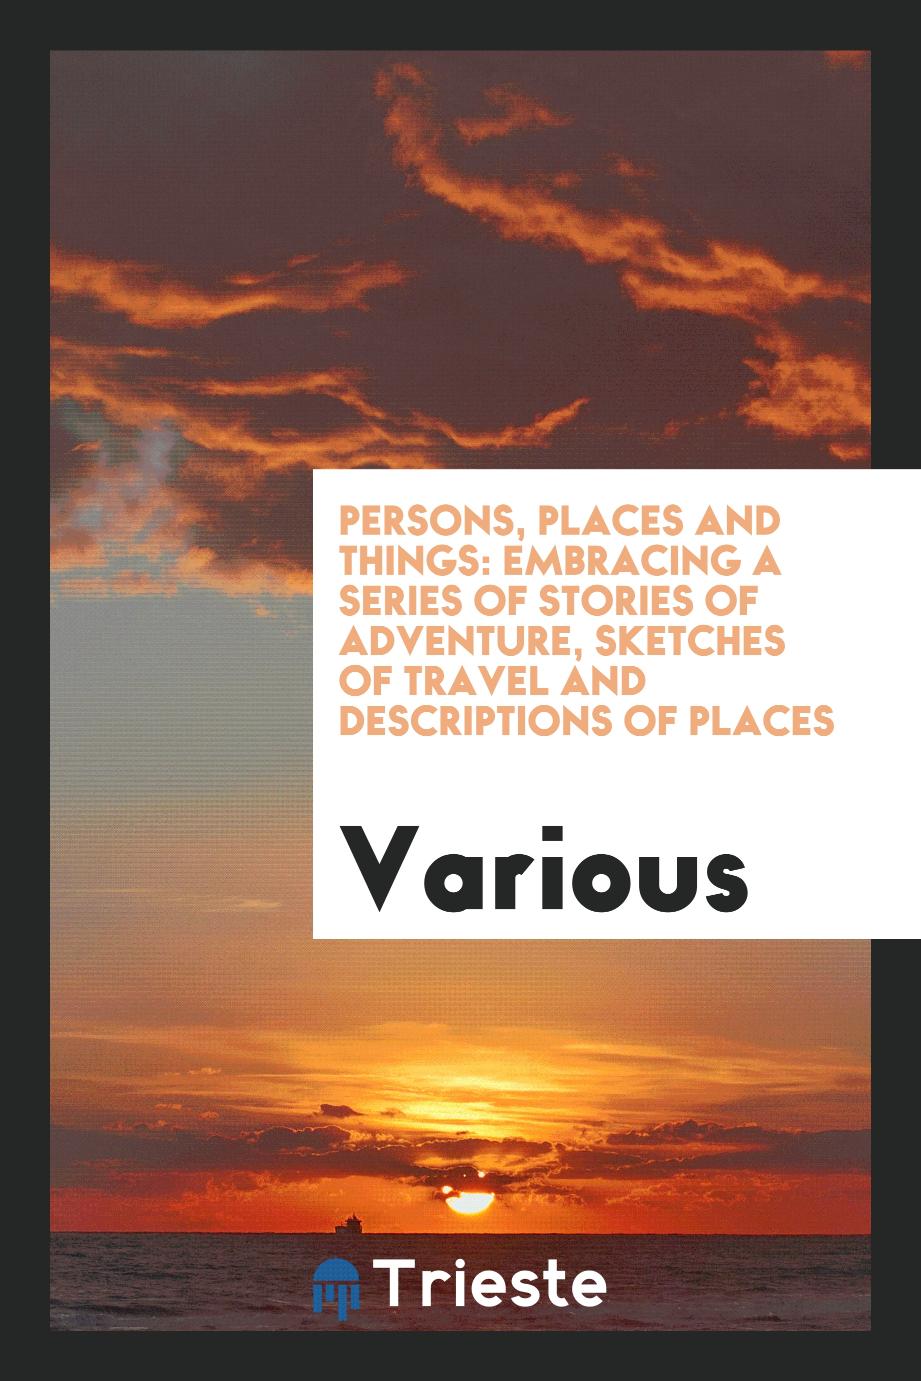 Persons, Places and Things: Embracing a Series of Stories of Adventure, Sketches of Travel and Descriptions of Places